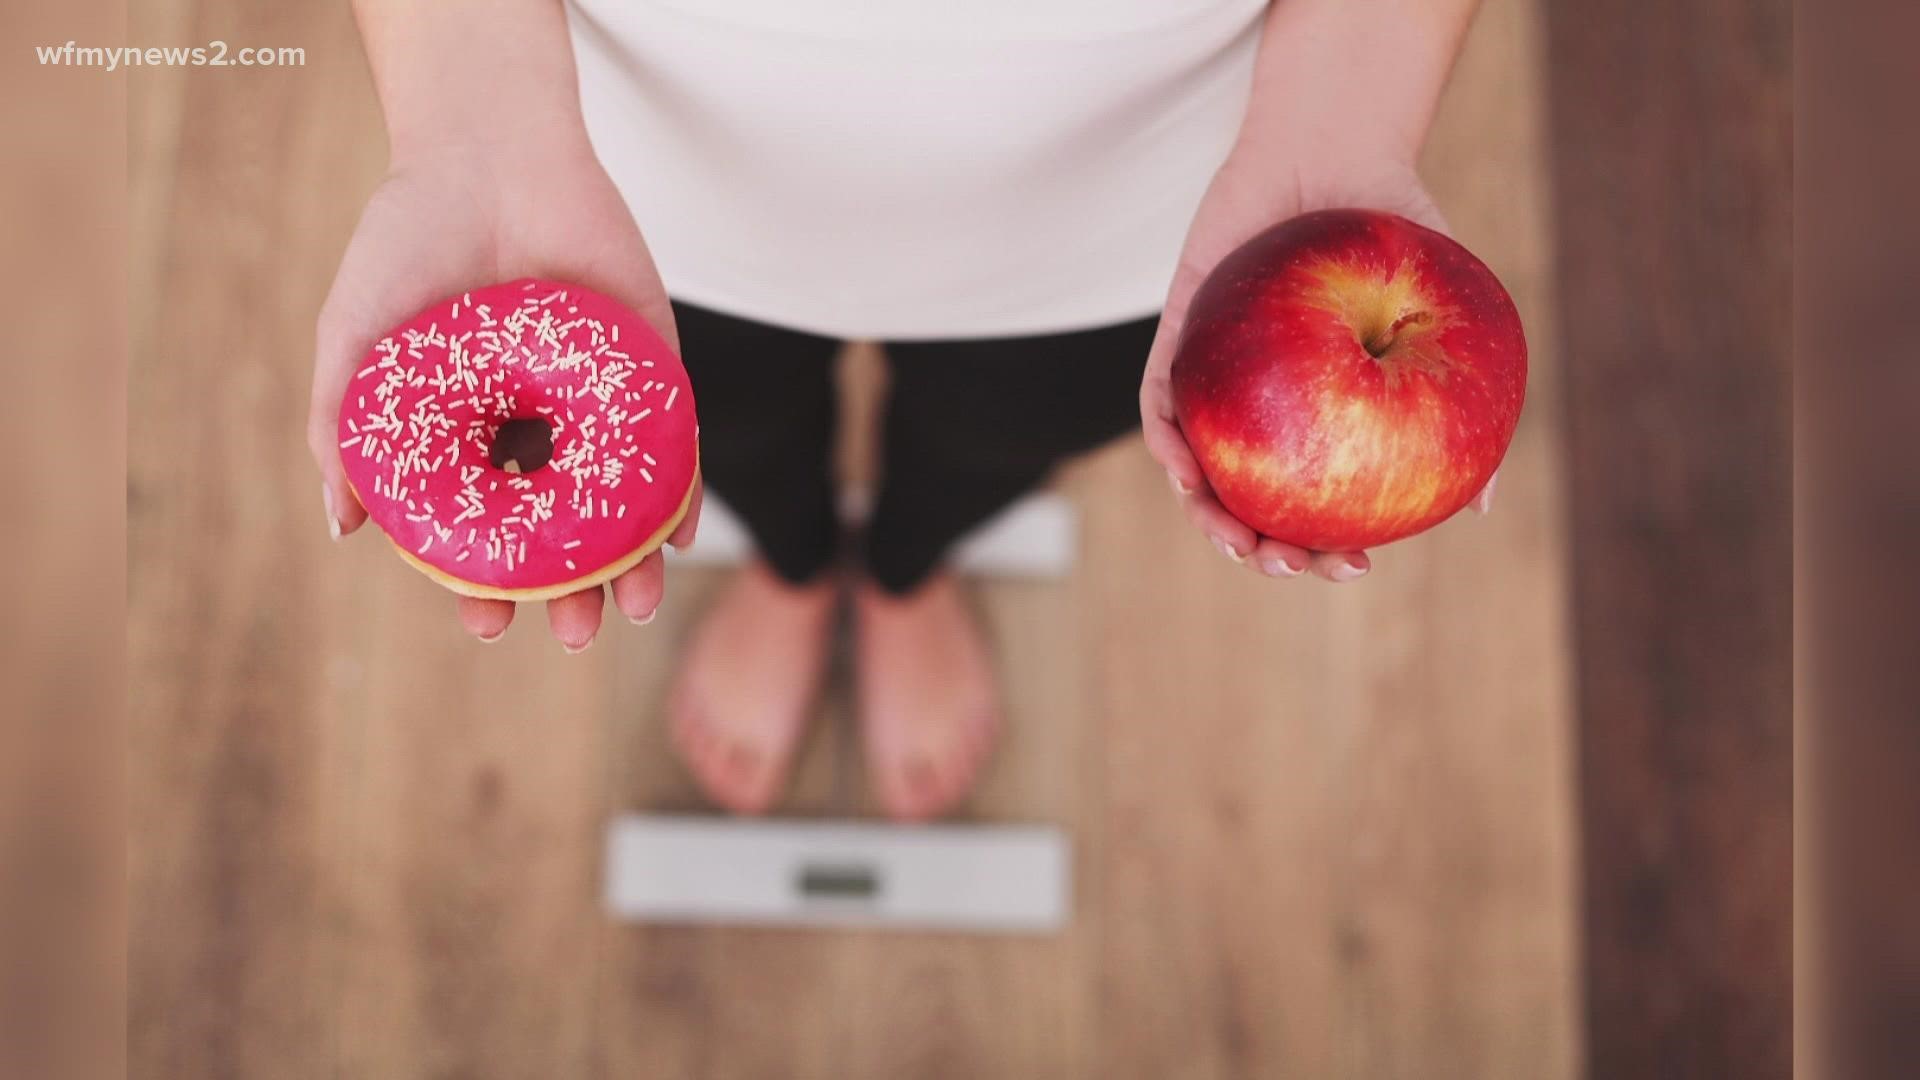 An art student in England is making music with food to change the way we feel about meal time.